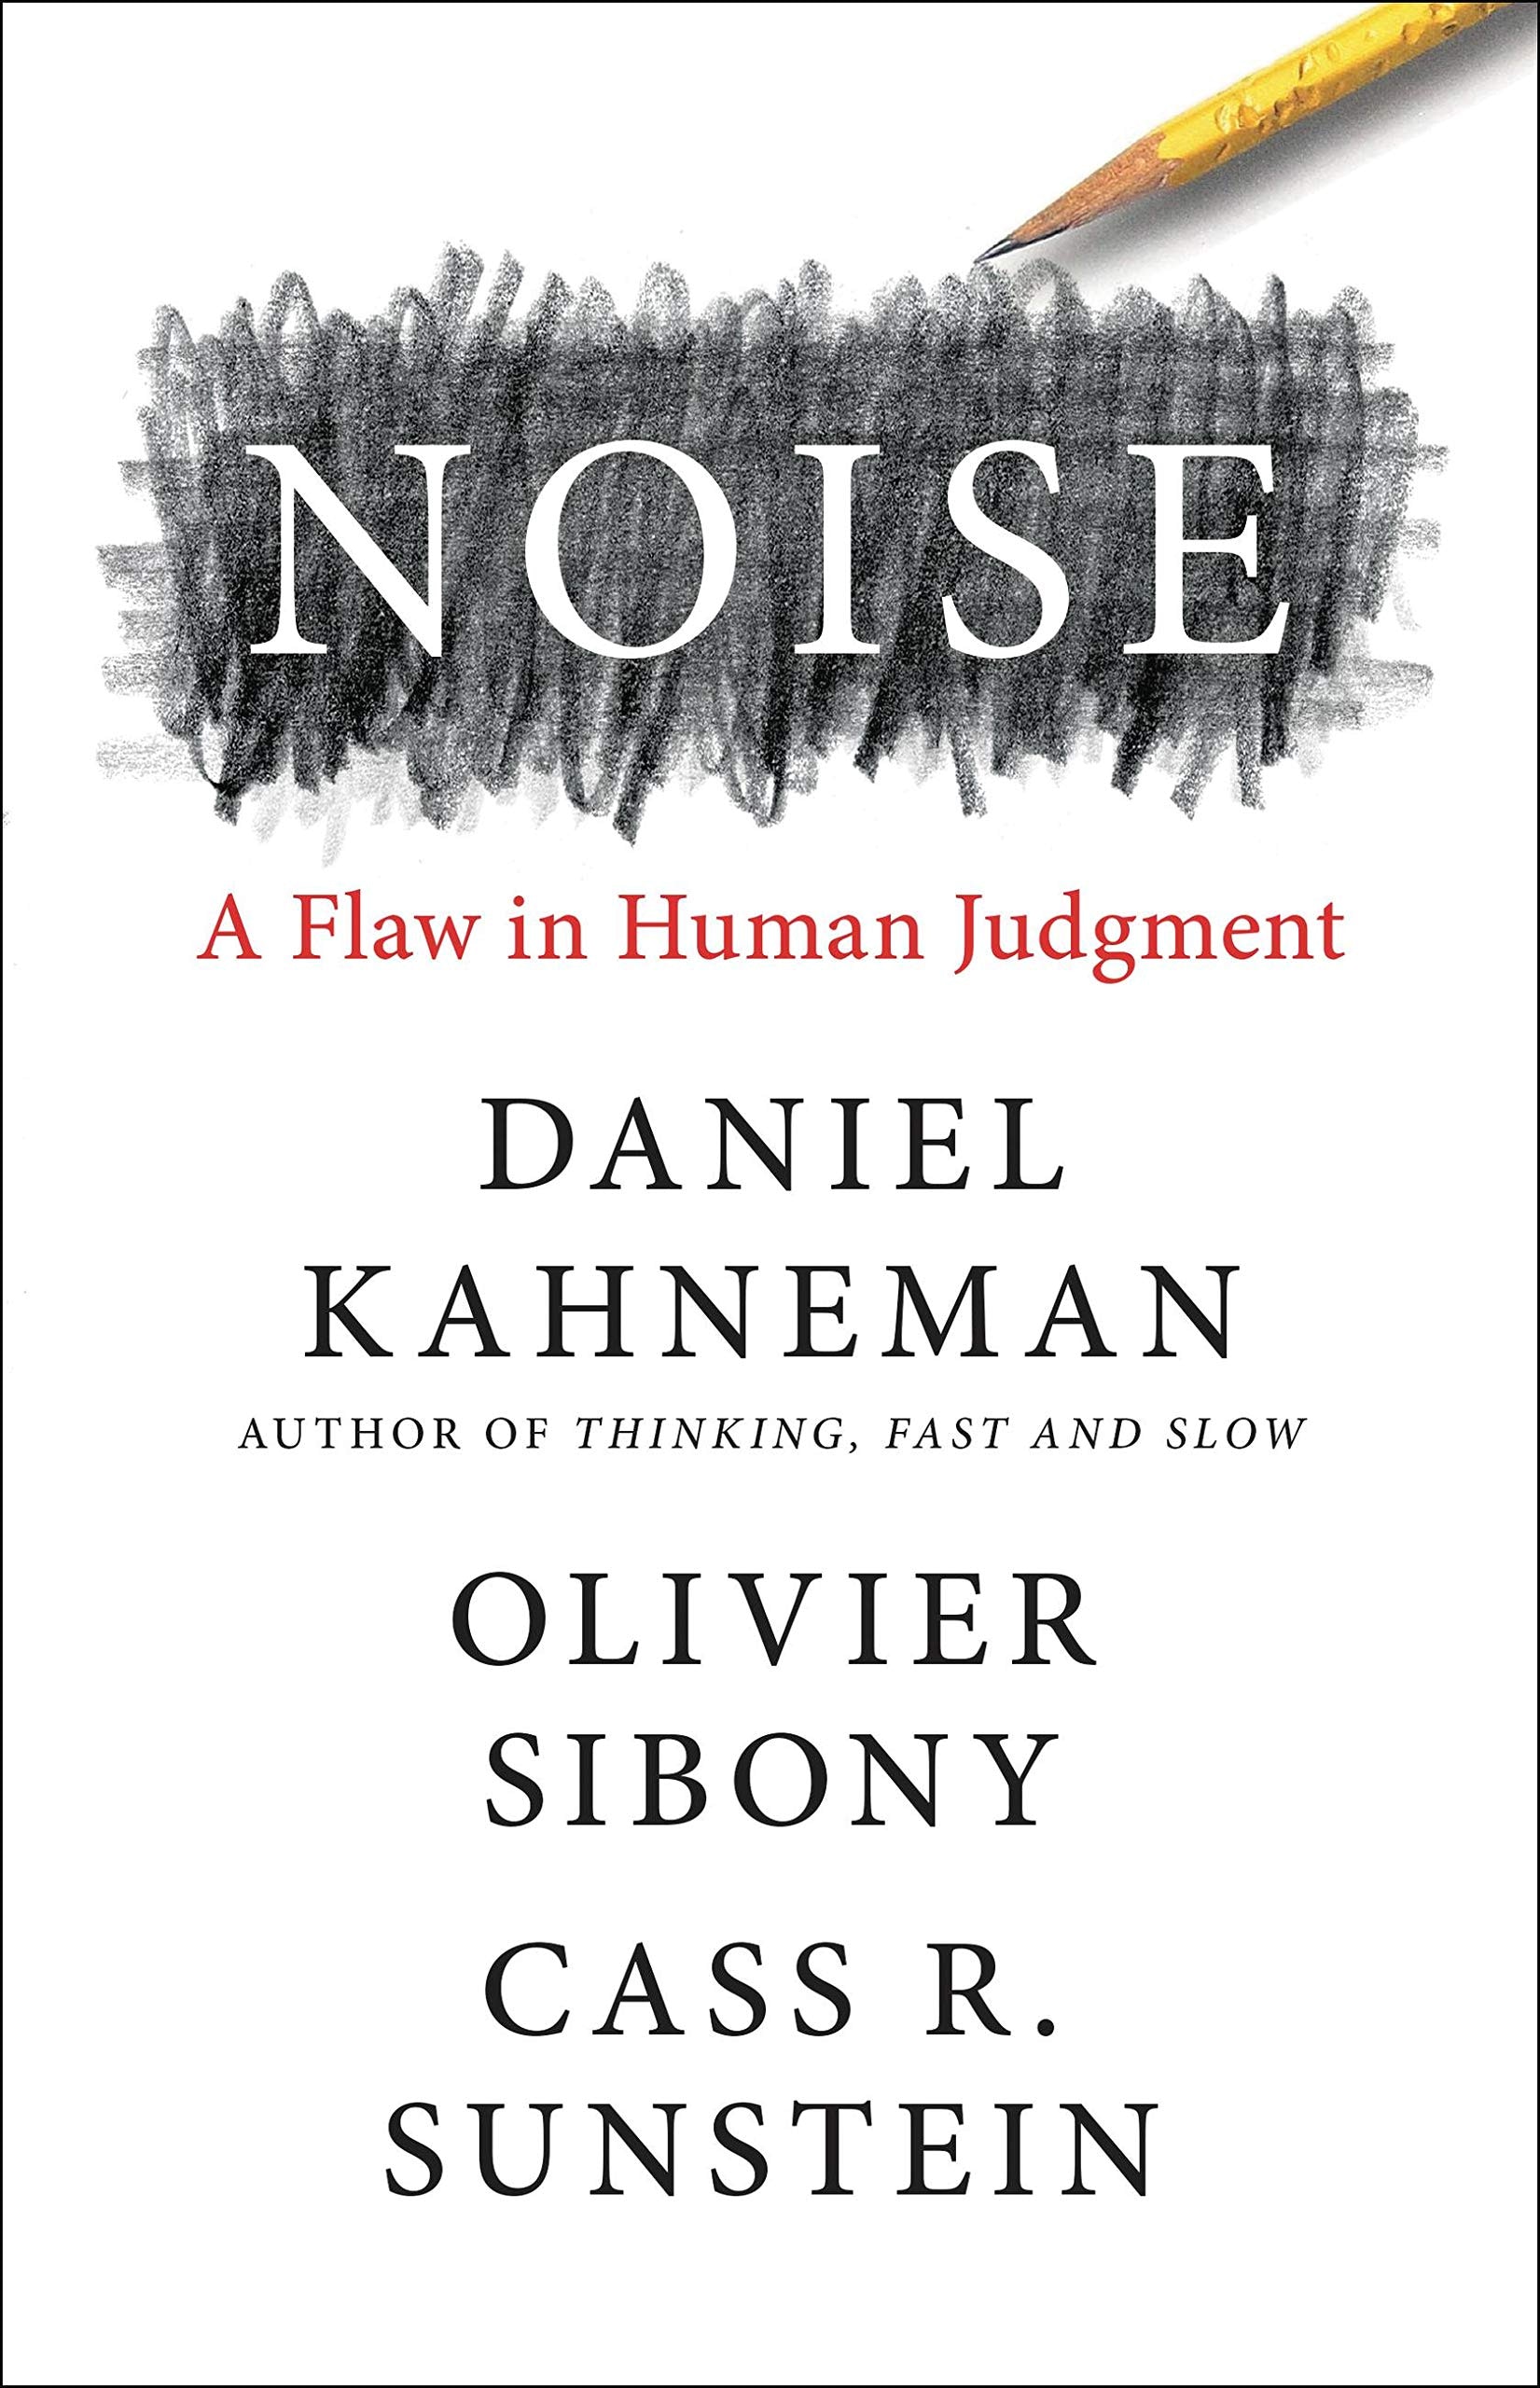 Noise: A Flaw in Human Judgment, by Daniel Kahneman, Olivier Sibony & Cass R. Sunstein (William Collins, 2021)